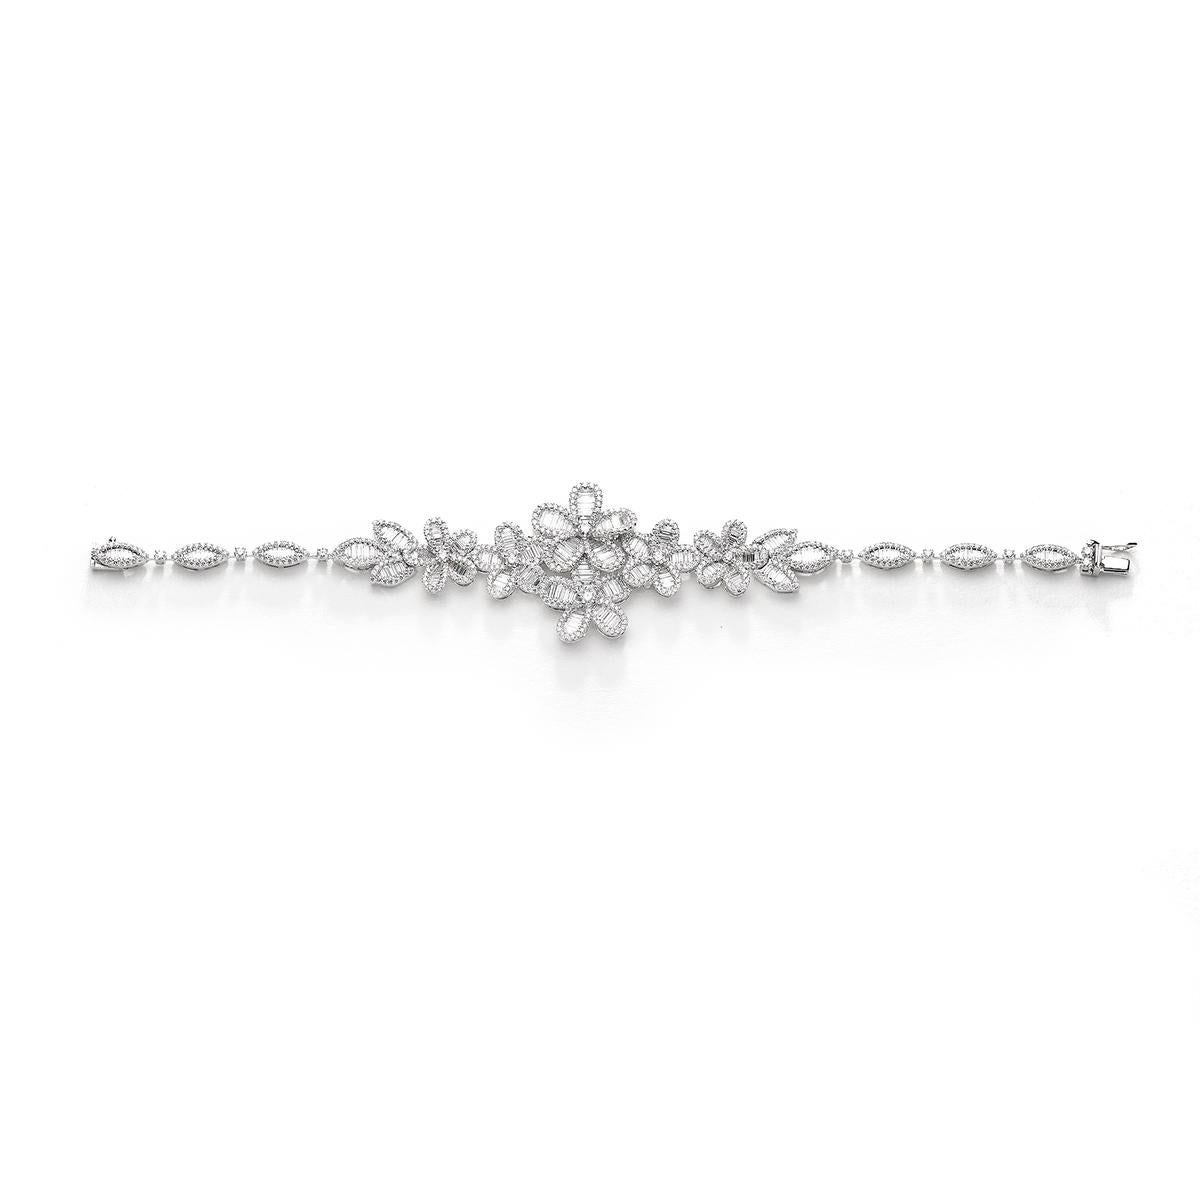 Introducing our radiant Bracelet in 18kt White Gold, designed to captivate with its exquisite beauty. Set with 278 brilliant baguette-cut diamonds weighing a total of 3.56 carats, along with 603 dazzling round diamonds weighing 3.44 carats.

This